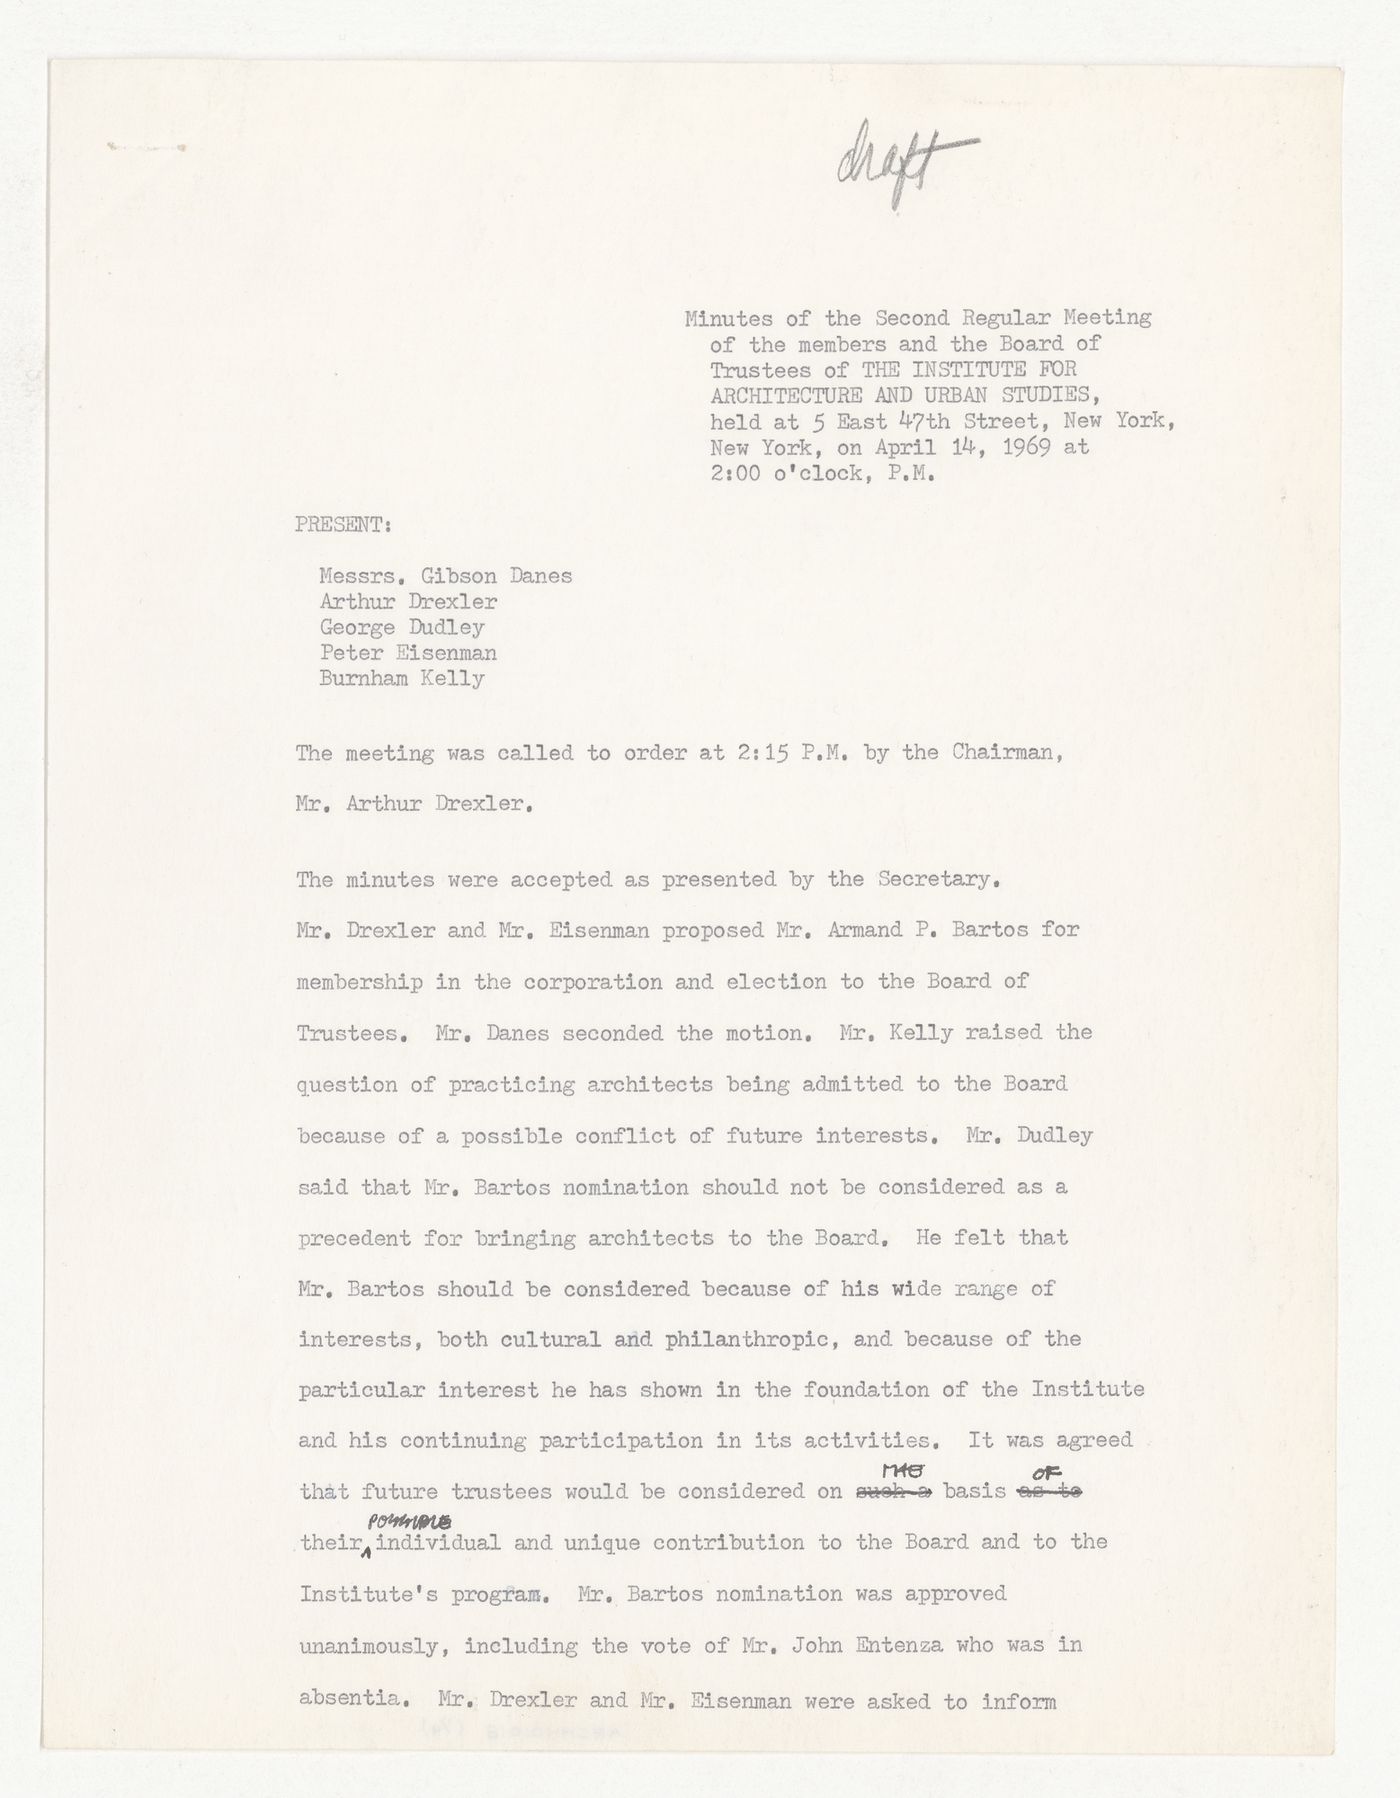 Draft minutes of the second regular meeting of the Members and the Board of Trustees with corrections and annotations by Peter D. Eisenman